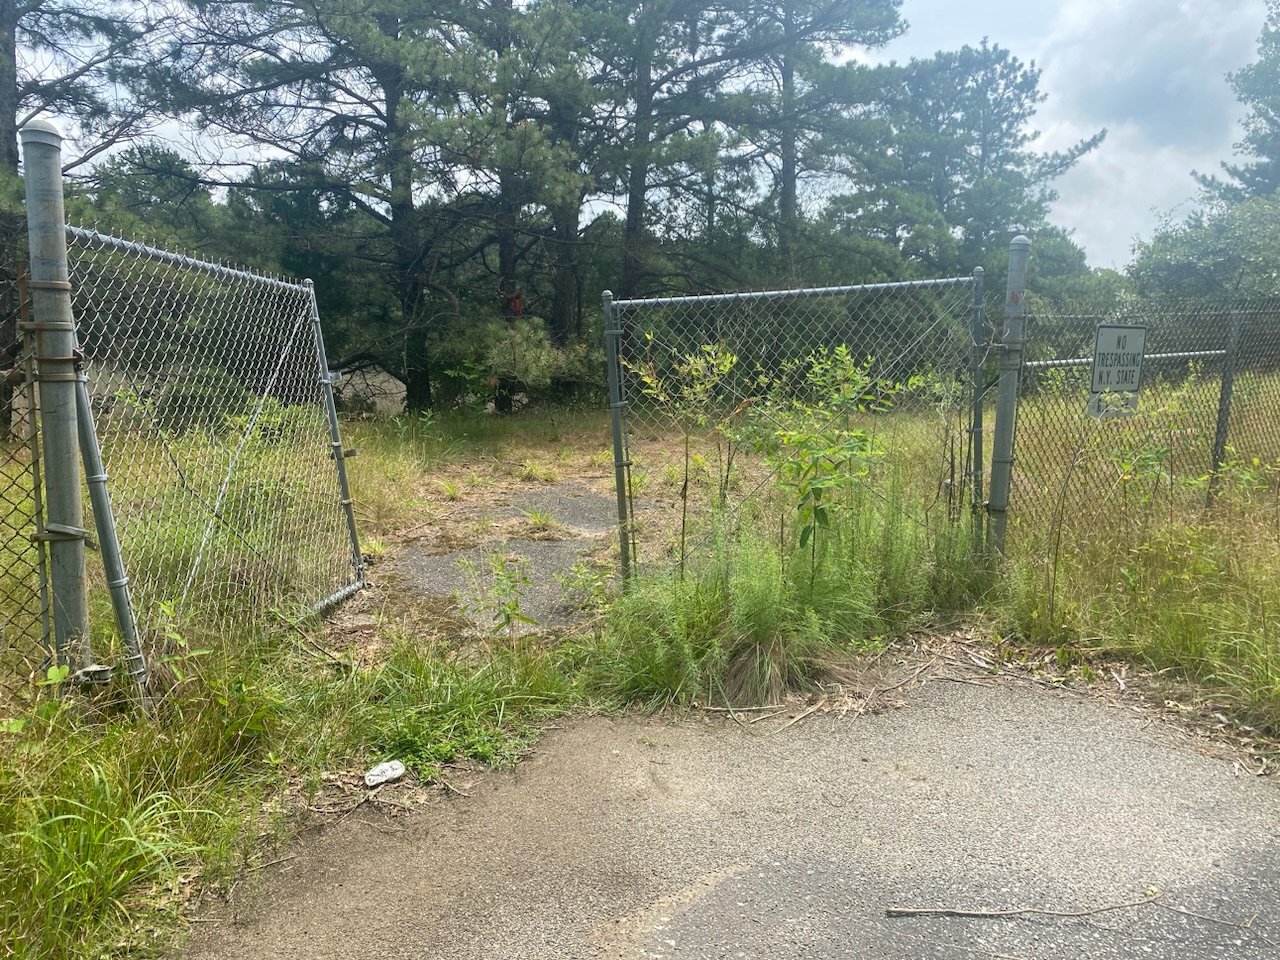 The end of the debris-strewn sump access road in Manorville where Taylor was found dead